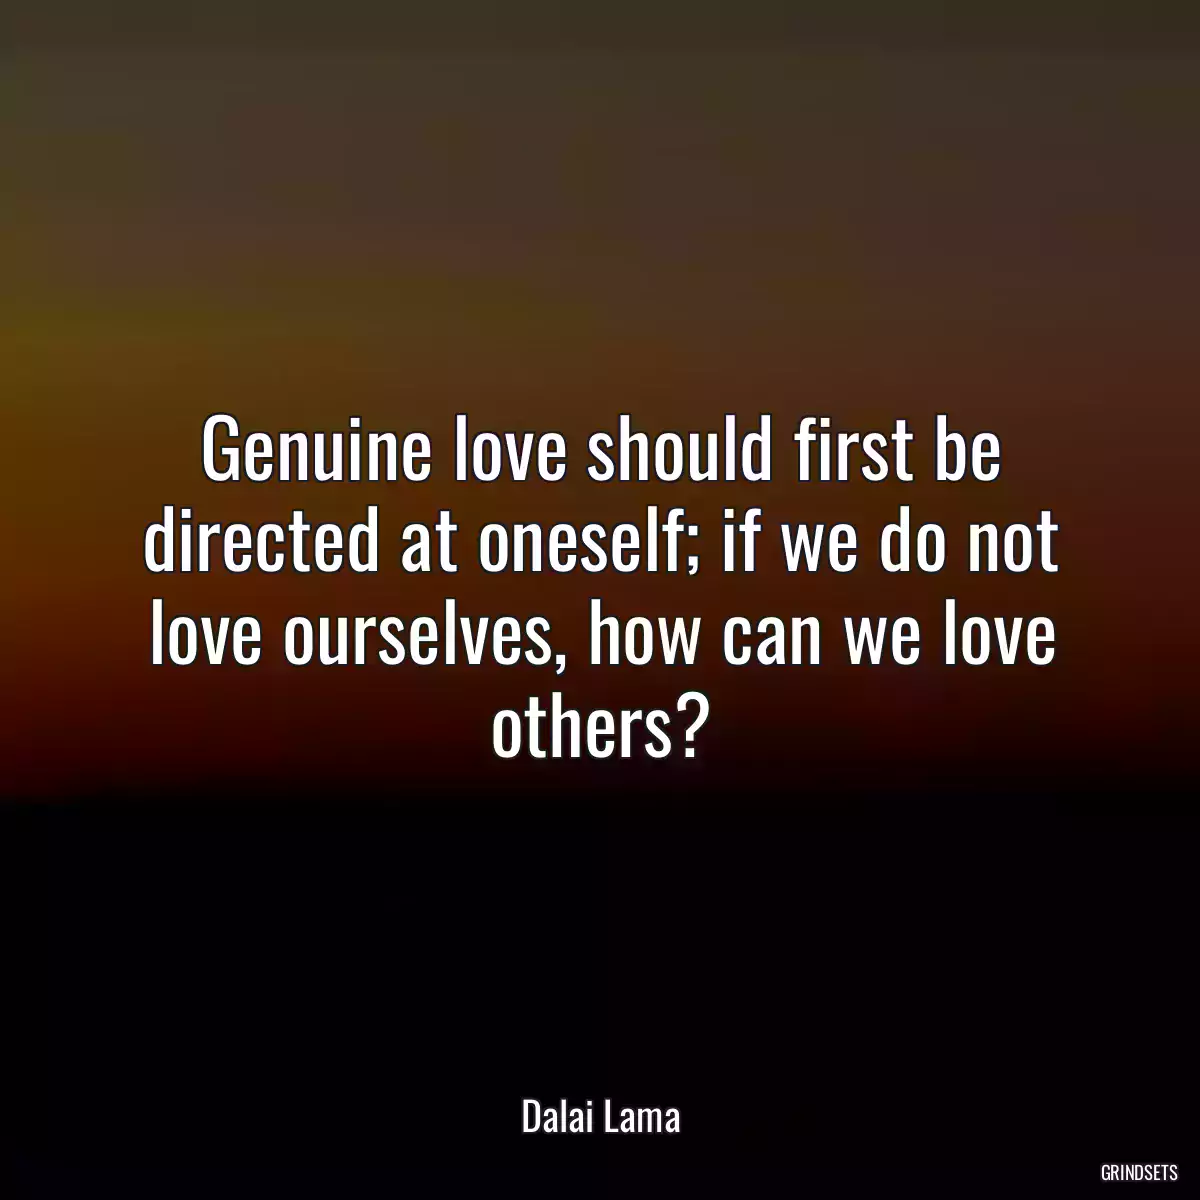 Genuine love should first be directed at oneself; if we do not love ourselves, how can we love others?